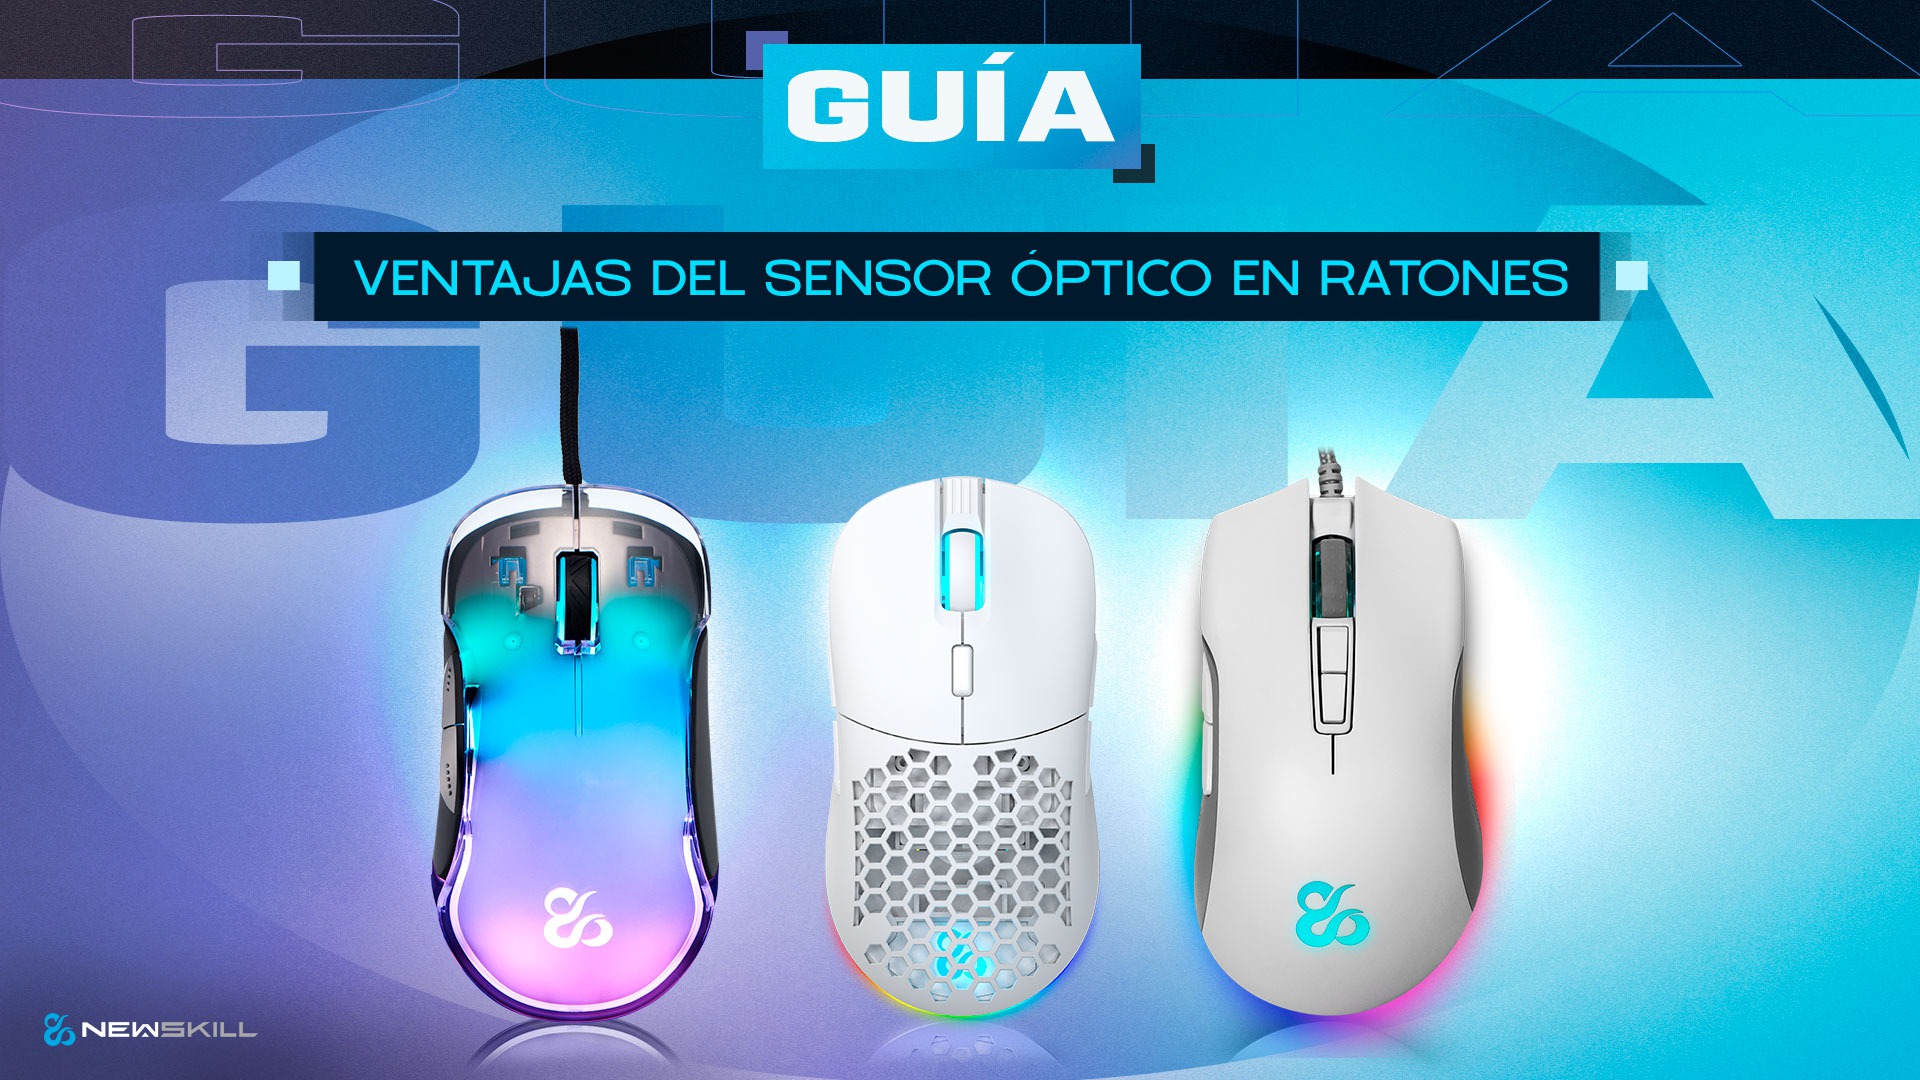 Advantages of the optical sensor in gaming mice